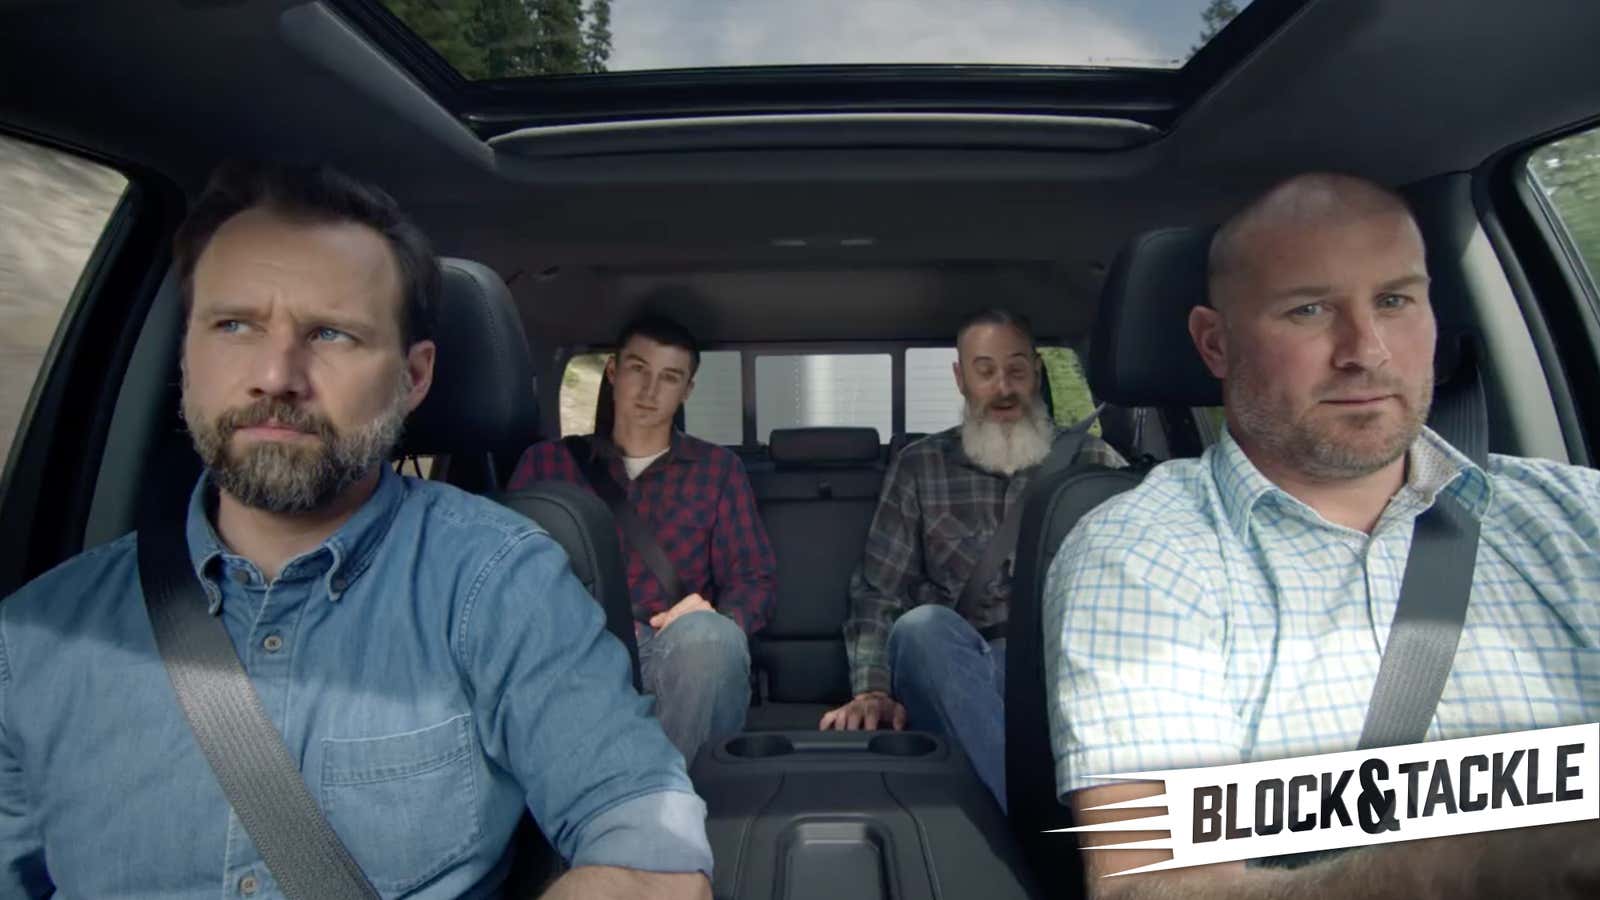 Why Chevy loves those “real people” ads even if viewers hate them